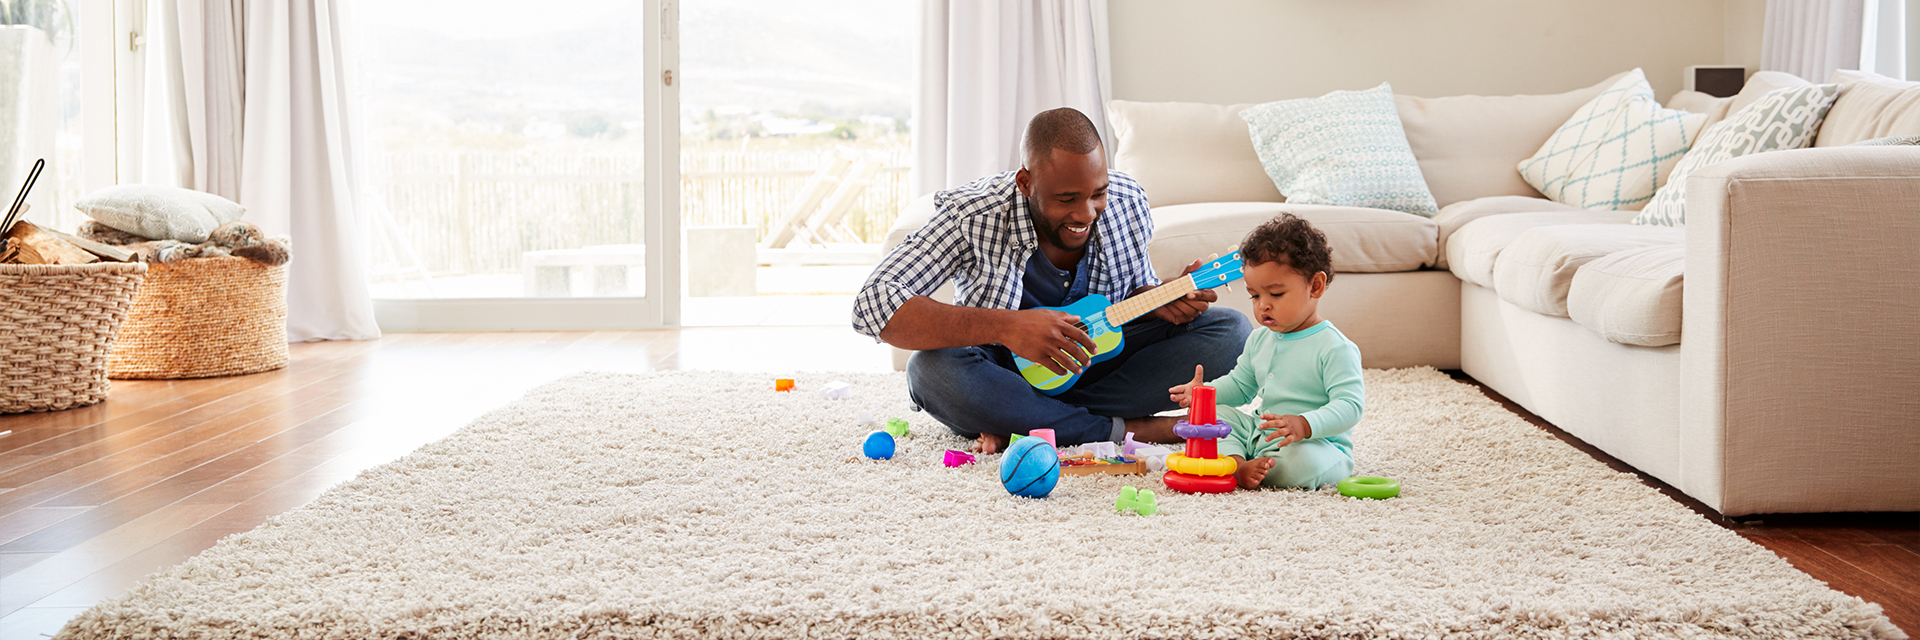 https://www.texashealth.org/baby-care/-/media/Project/THR/Sub-Sites/THR-Baby-Care/Header-Images/Header-dad-infant-playing-with-toys.jpg?h=640&iar=0&w=1920&hash=C1DE93AA003B76035EC88808AEC3018C